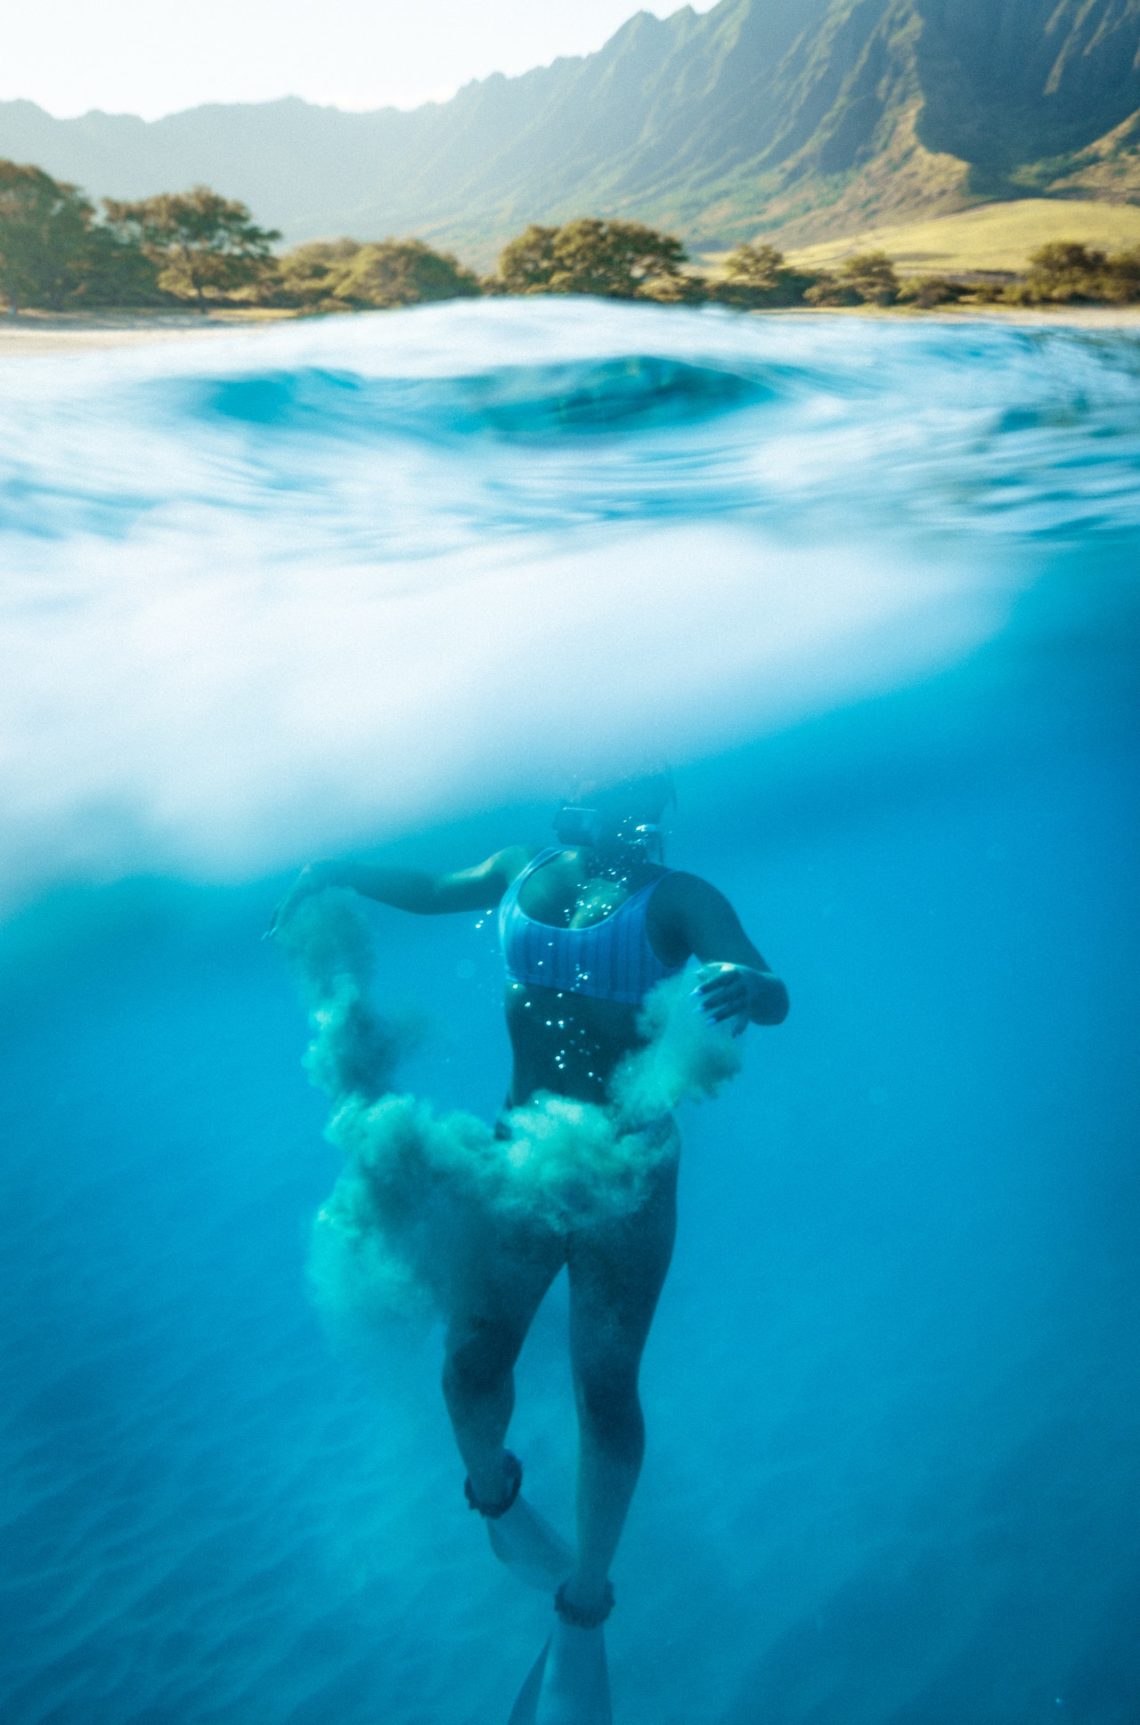 A person diving in the blue water of Hawaii